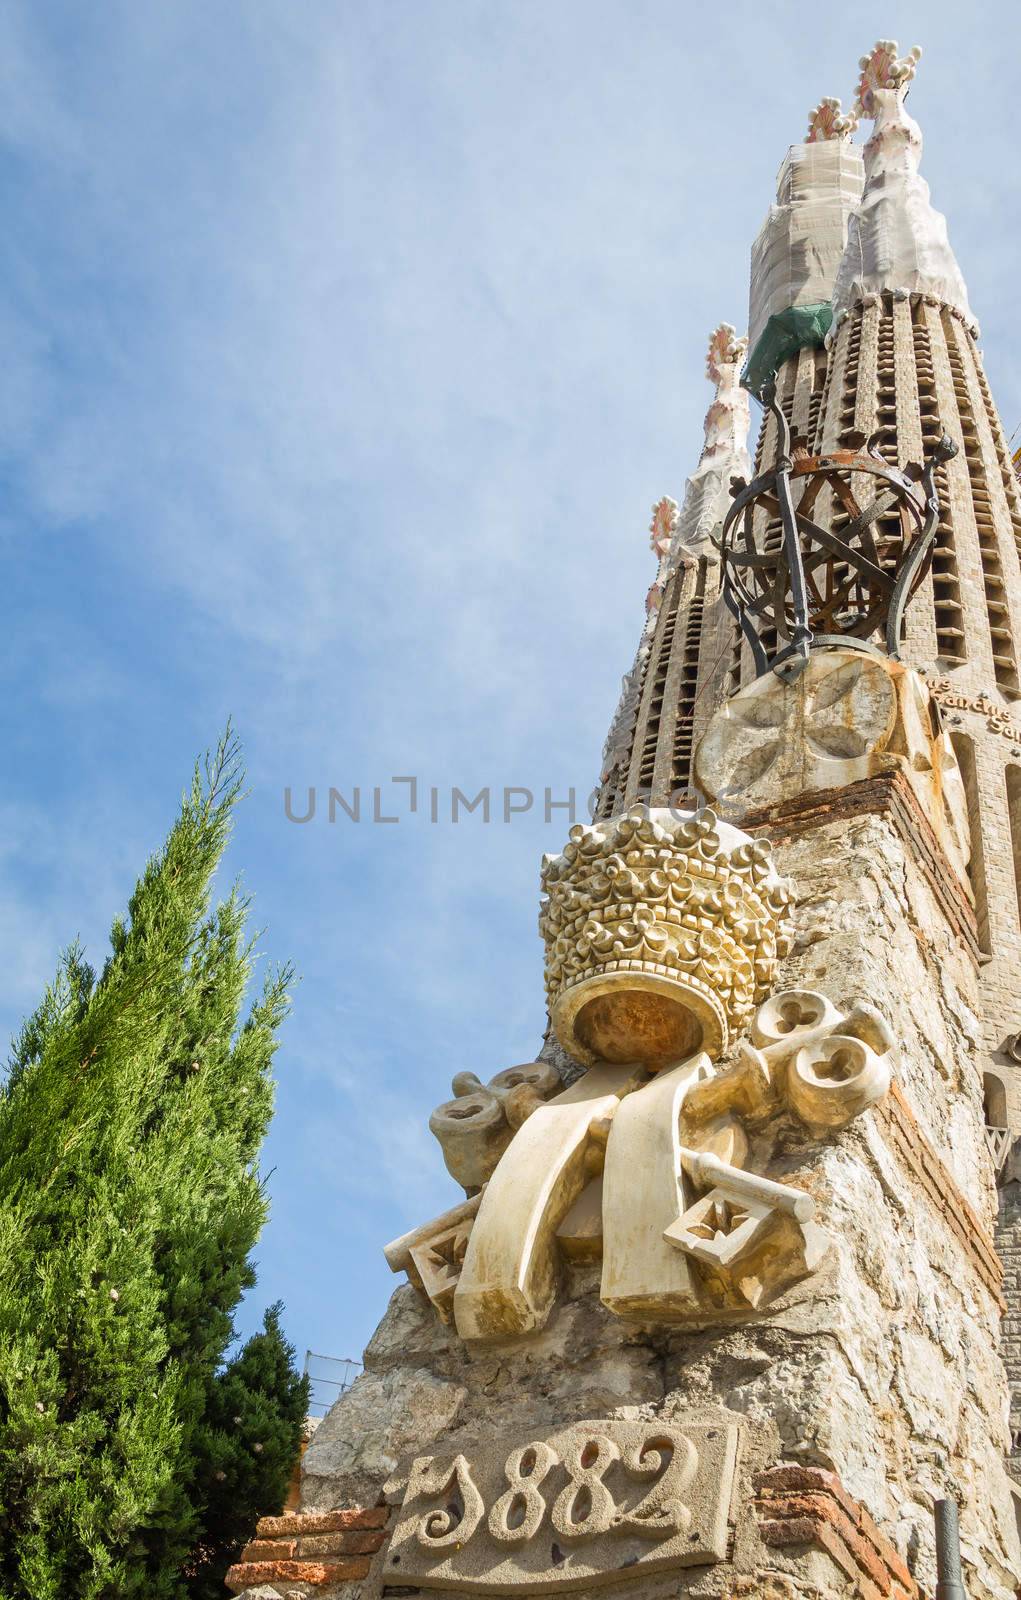 Architecture detail of the Sagrada Familia cathedral, in Barcelo by doble.d